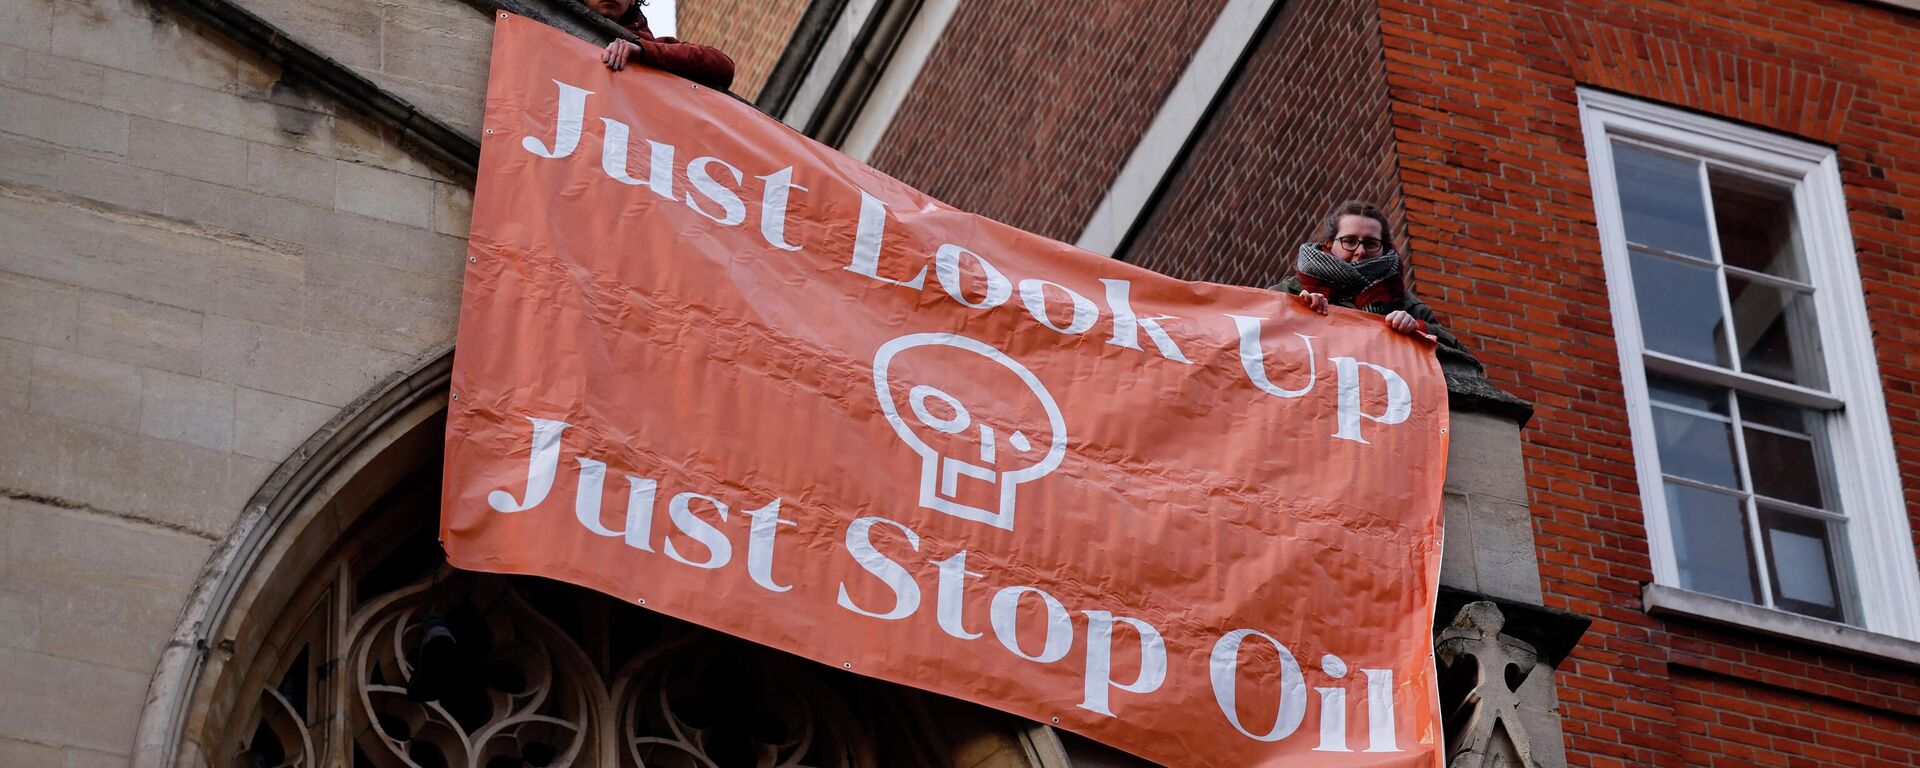 Activists from the Just Stop Oil campaign group protest against the use of oil after the arrivals for the BAFTA British Academy Film Awards at the Royal Albert Hall, in London, on March 13, 2022. - Sputnik International, 1920, 31.10.2022